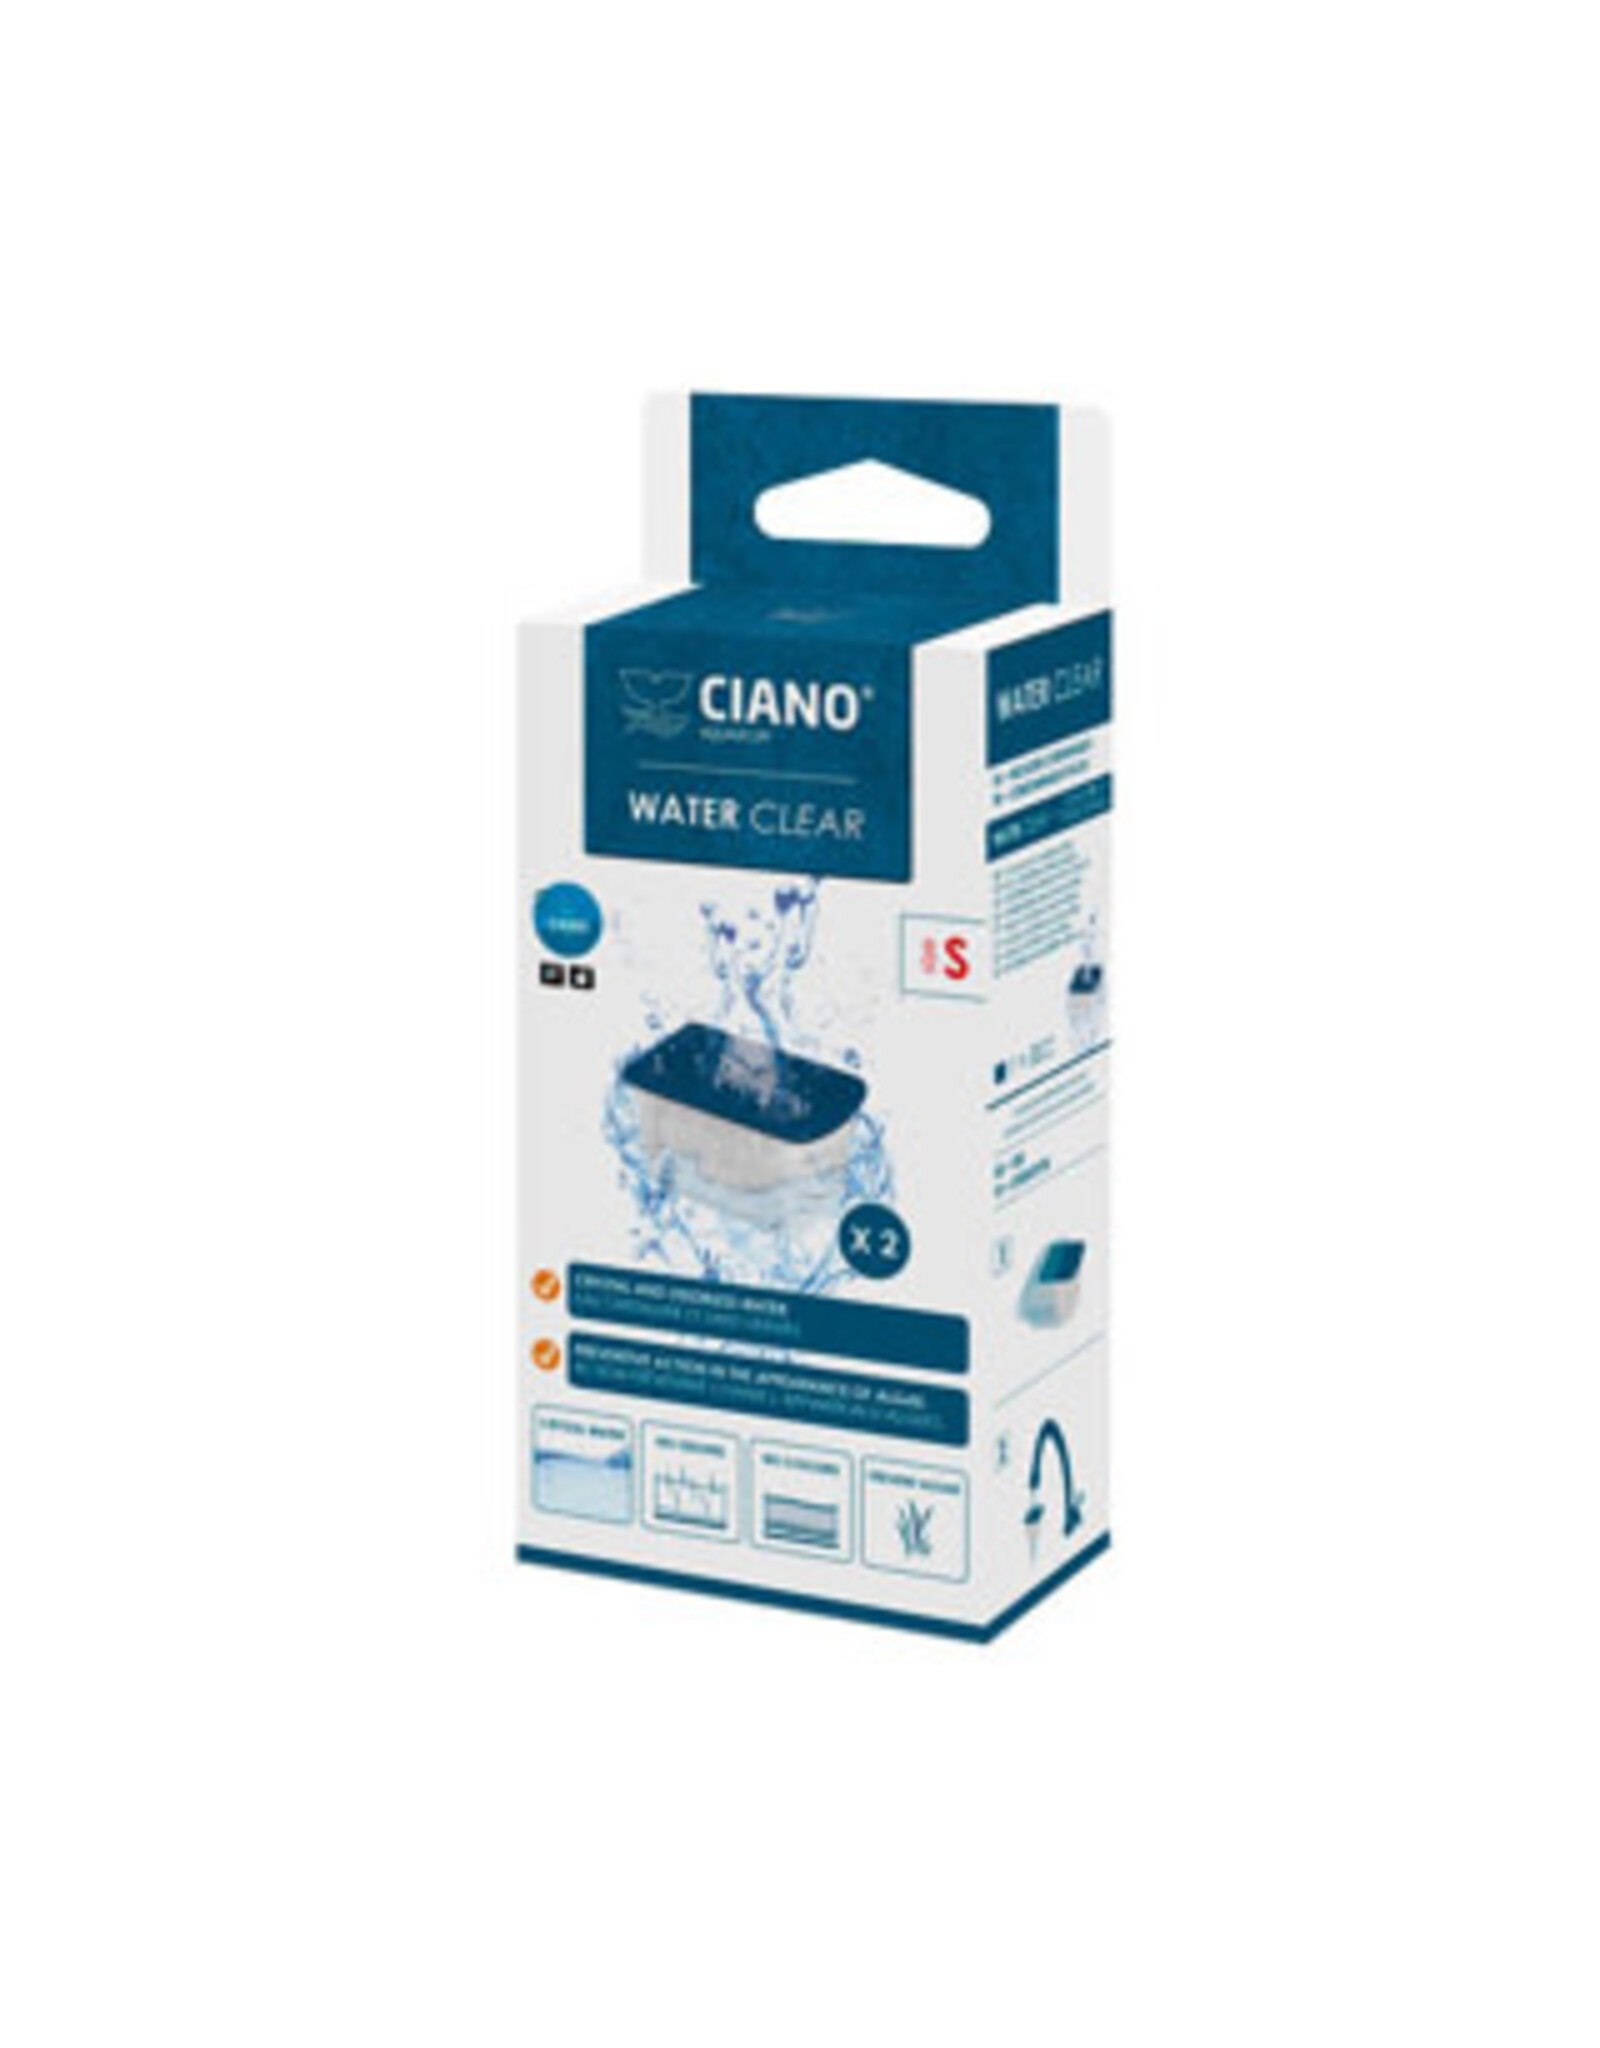 Ciano Ciano S Water Clear Cartridge x 2